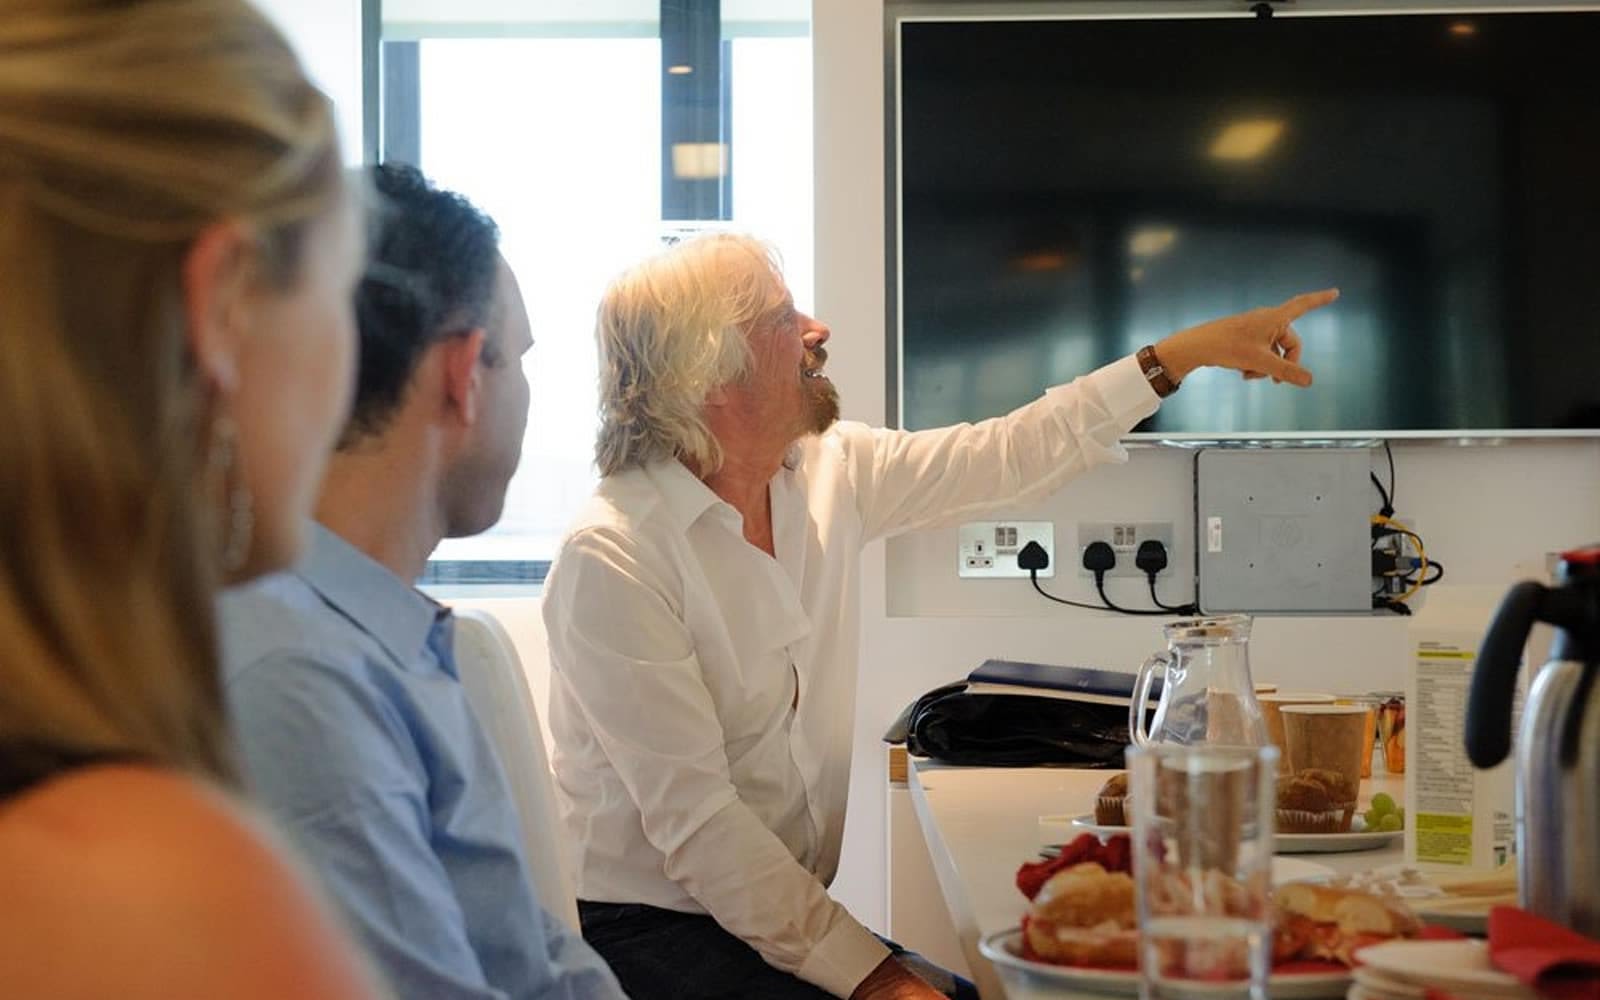 Richard Branson pointing and smiling during a meeting at Virgin Management